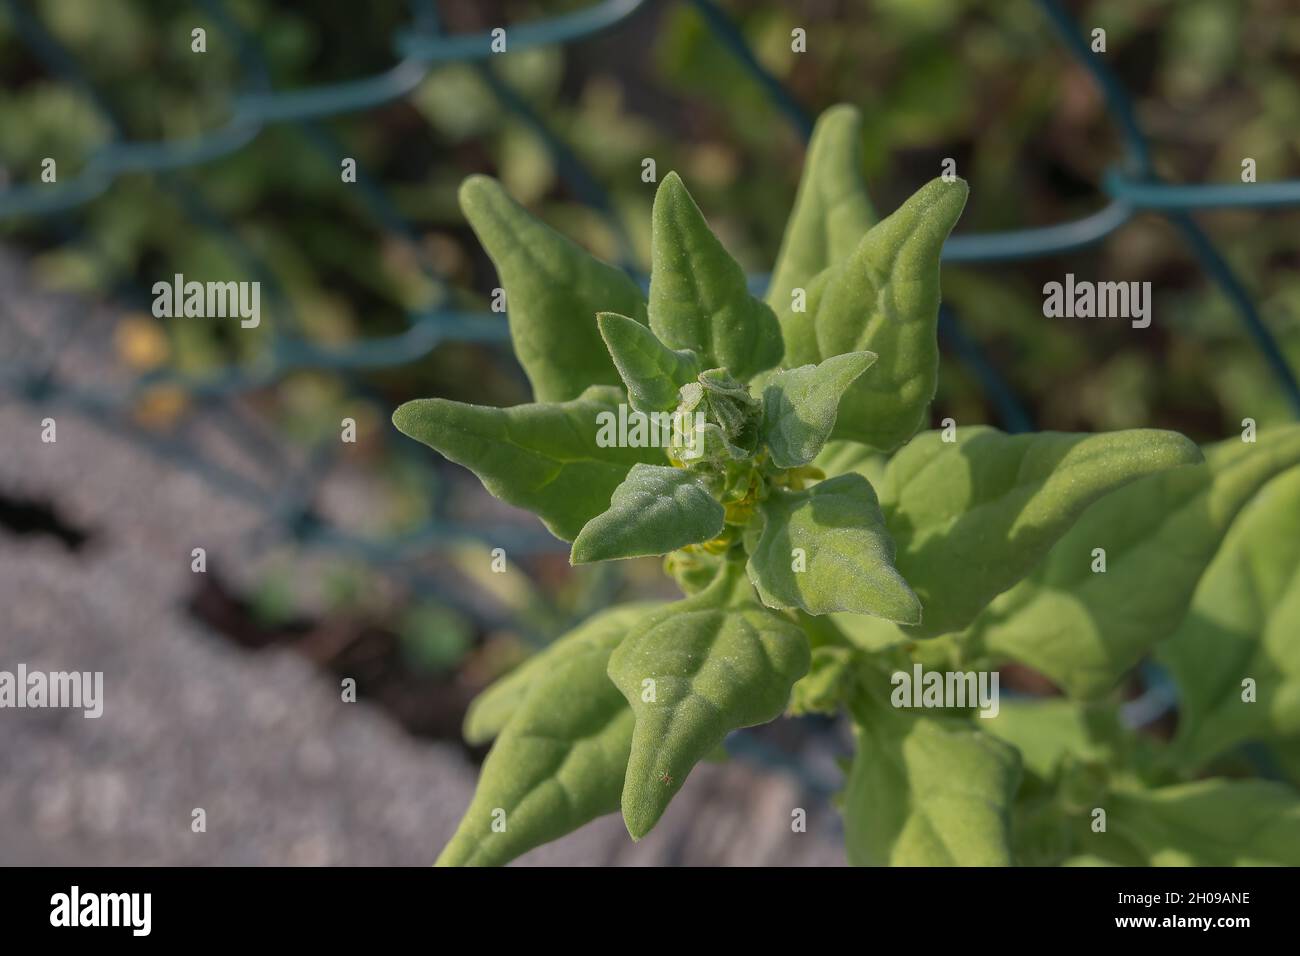 New Zealand spinach leaves close up view with sunlight outdoors Stock Photo